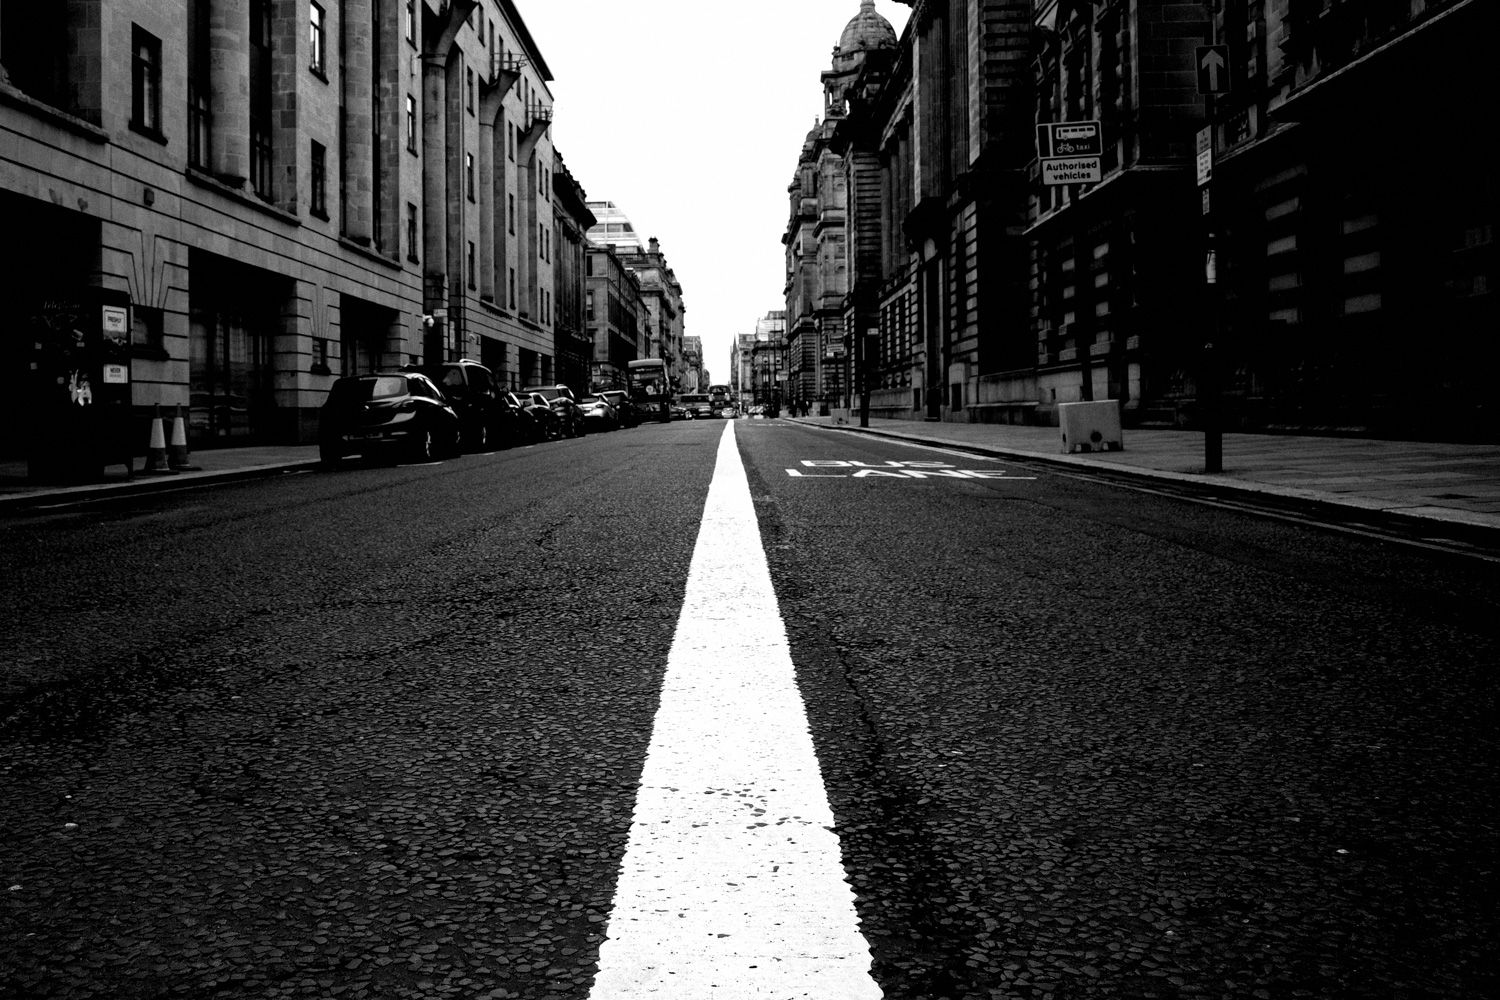 Middle of the road in Glasgow's merchant city.